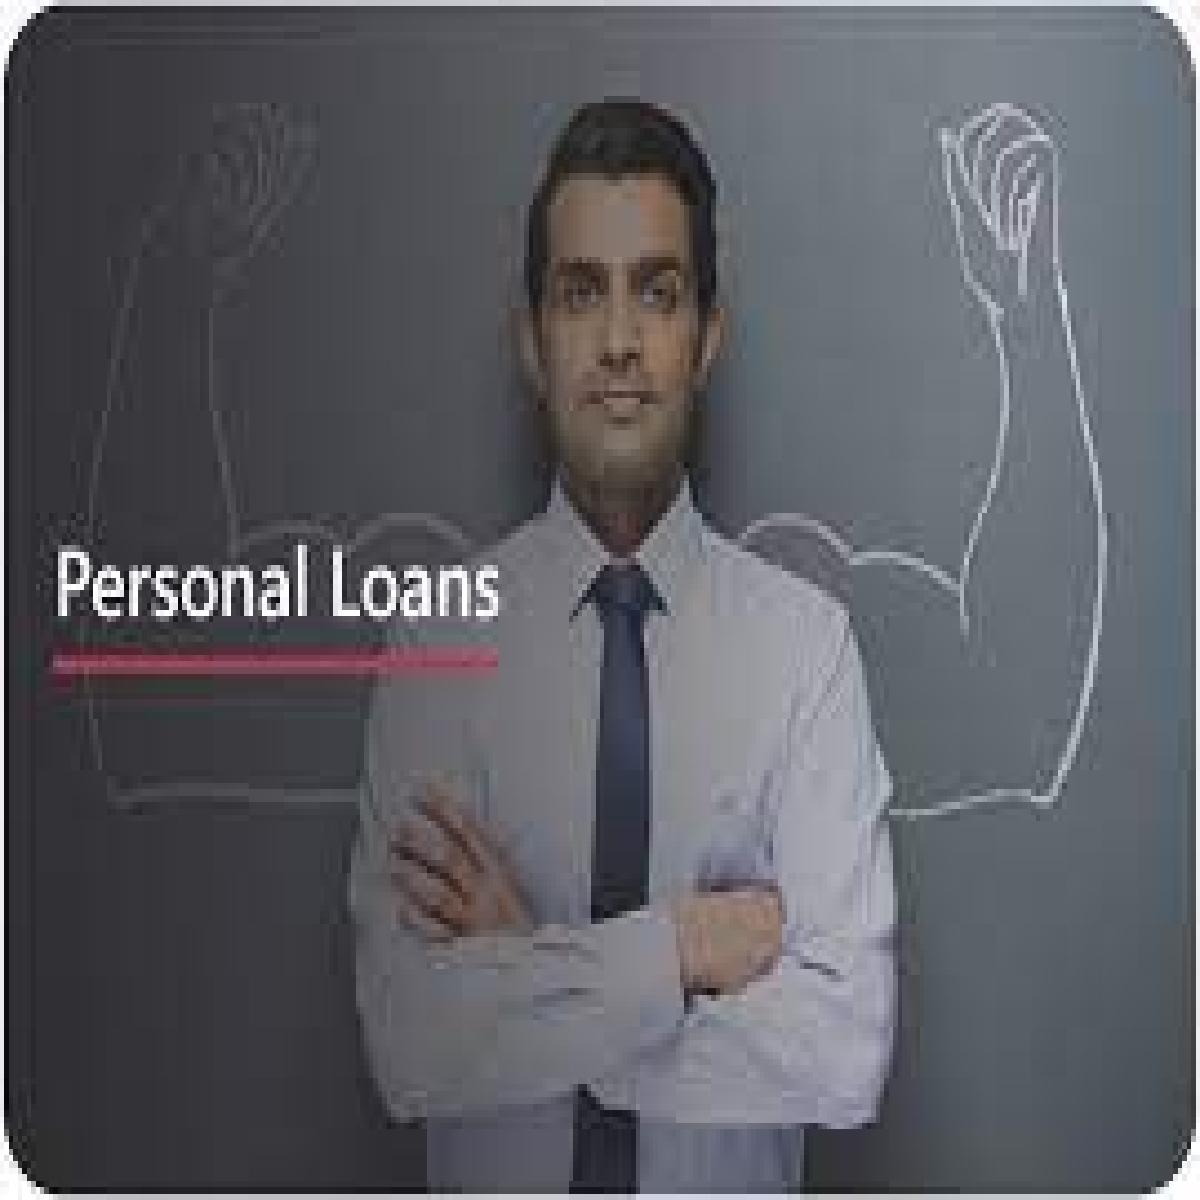 Finnable Now Offers Personal Loans Without Credit Score